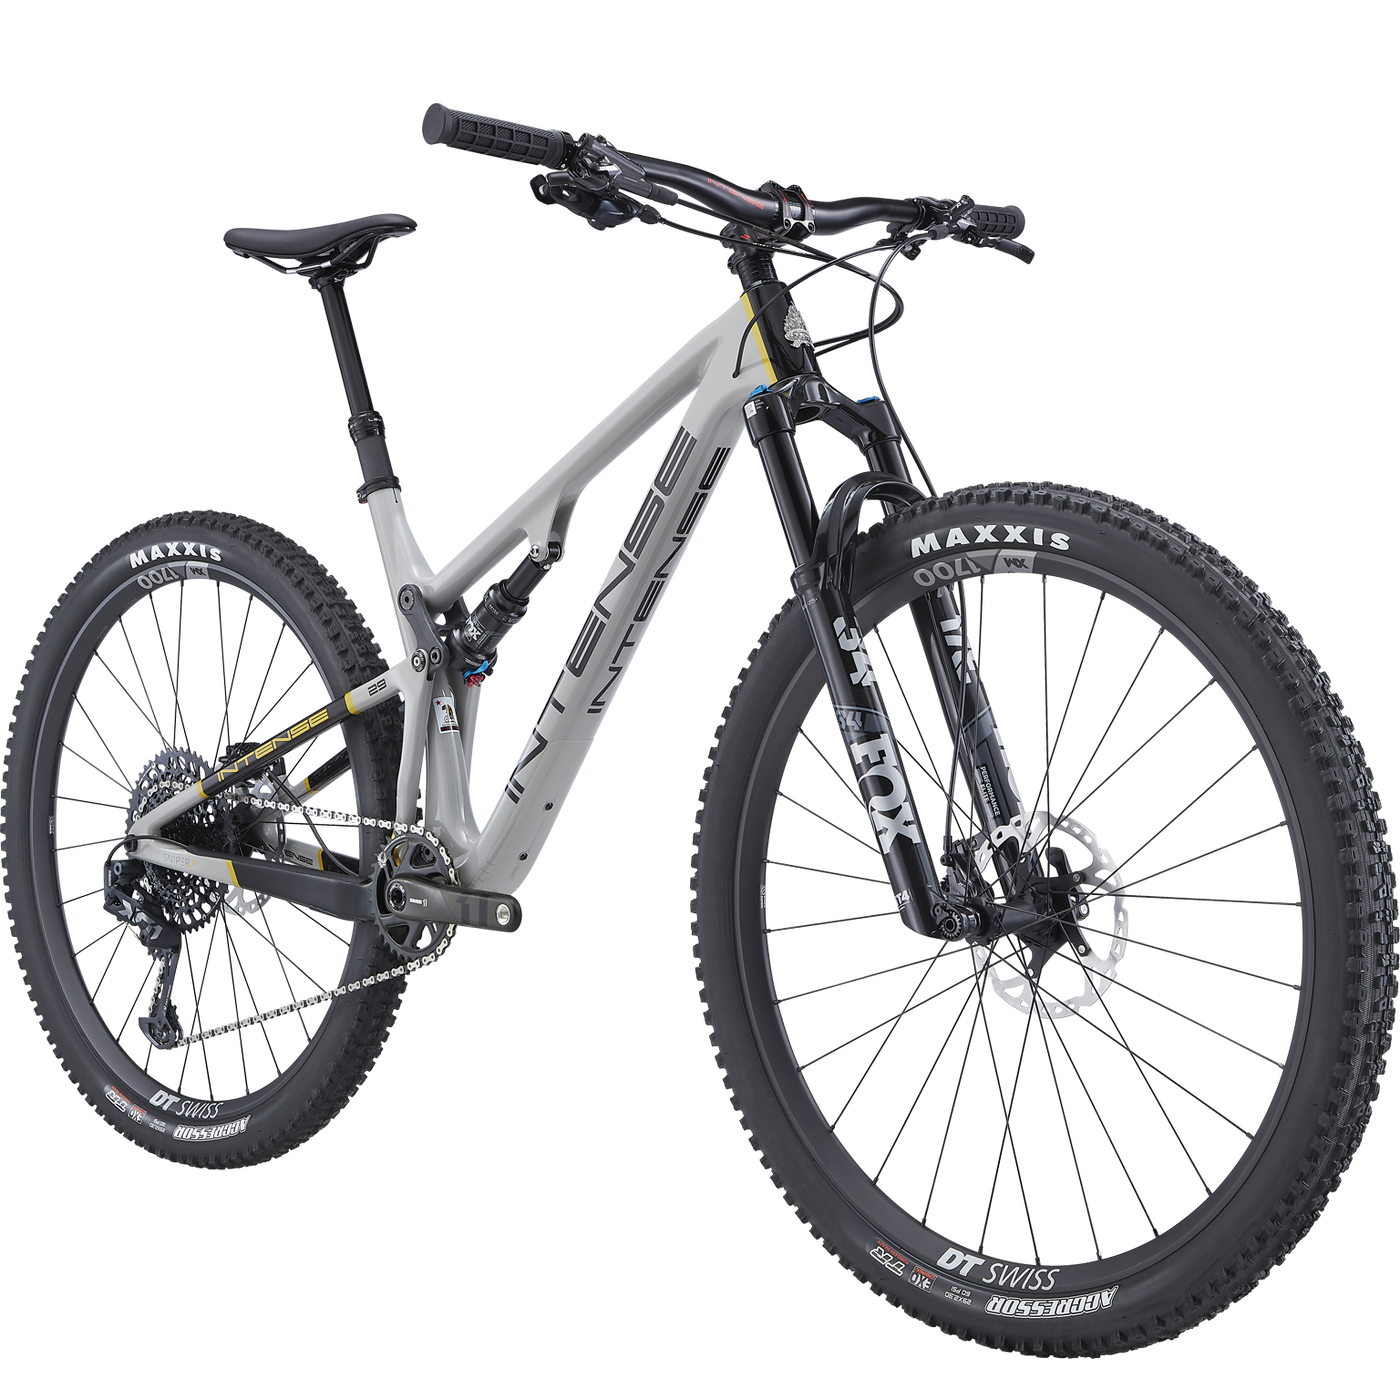 Shop INTENSE Cycles Carbon Cross Country Mountain Bike the Sniper T for sale online or at an authorized dealer.